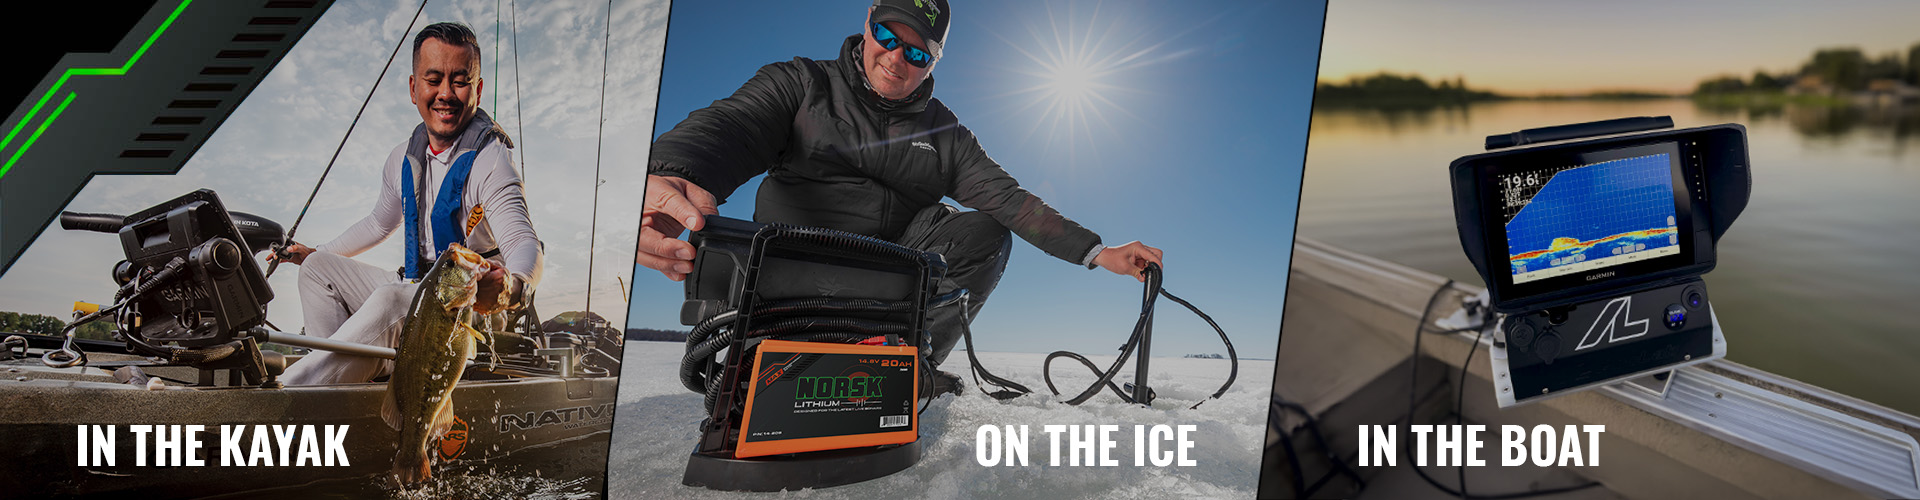 Norsk Lithium Ice Fishing Lithium Batteries